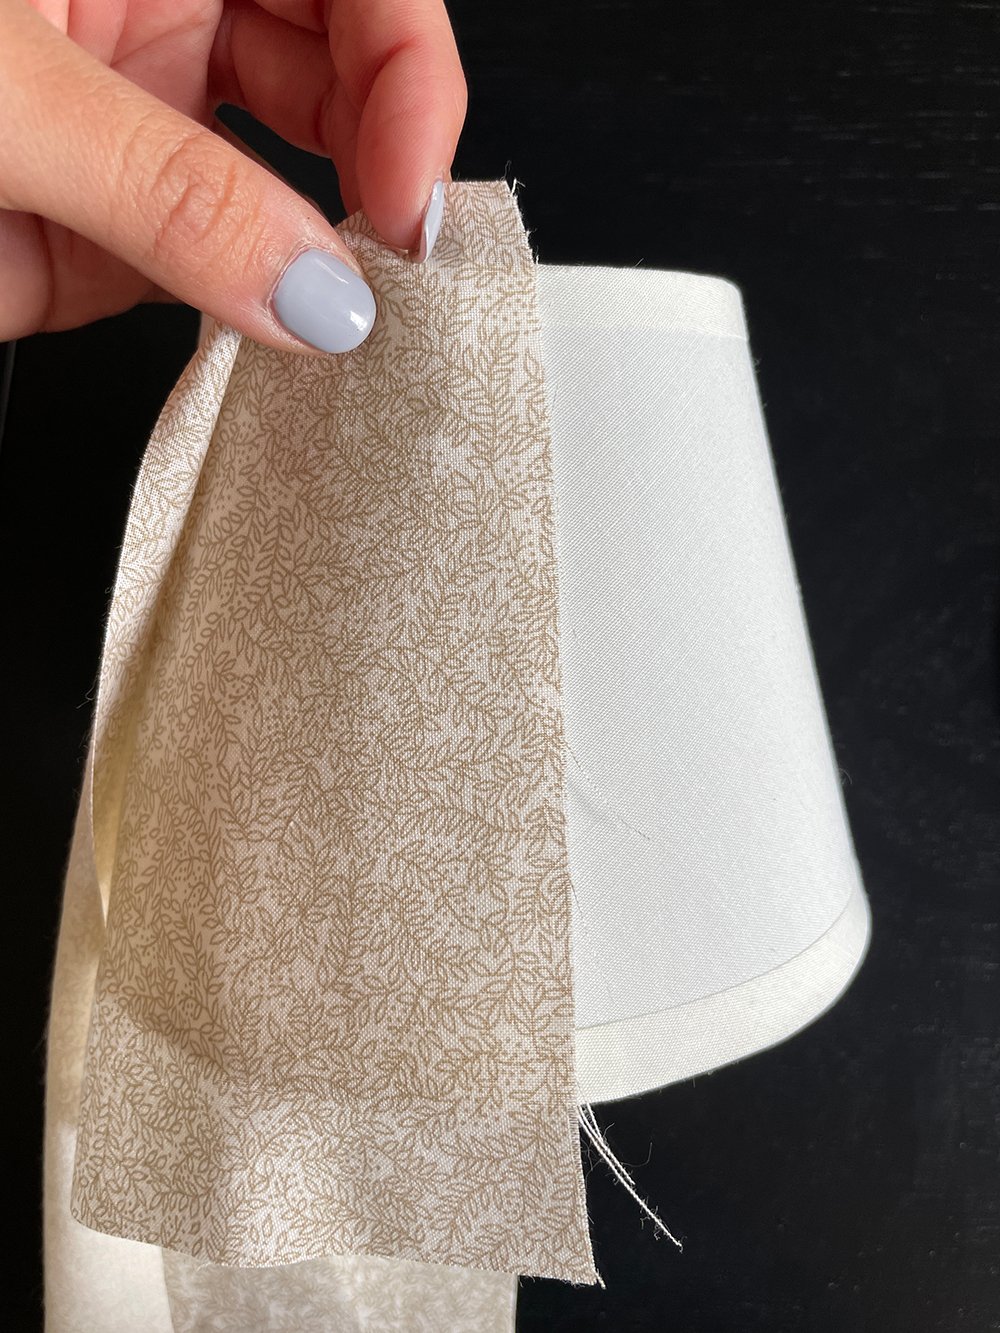 Tiny Lamp Makeover (Pleated Shade DIY) - roomfortuesday.com